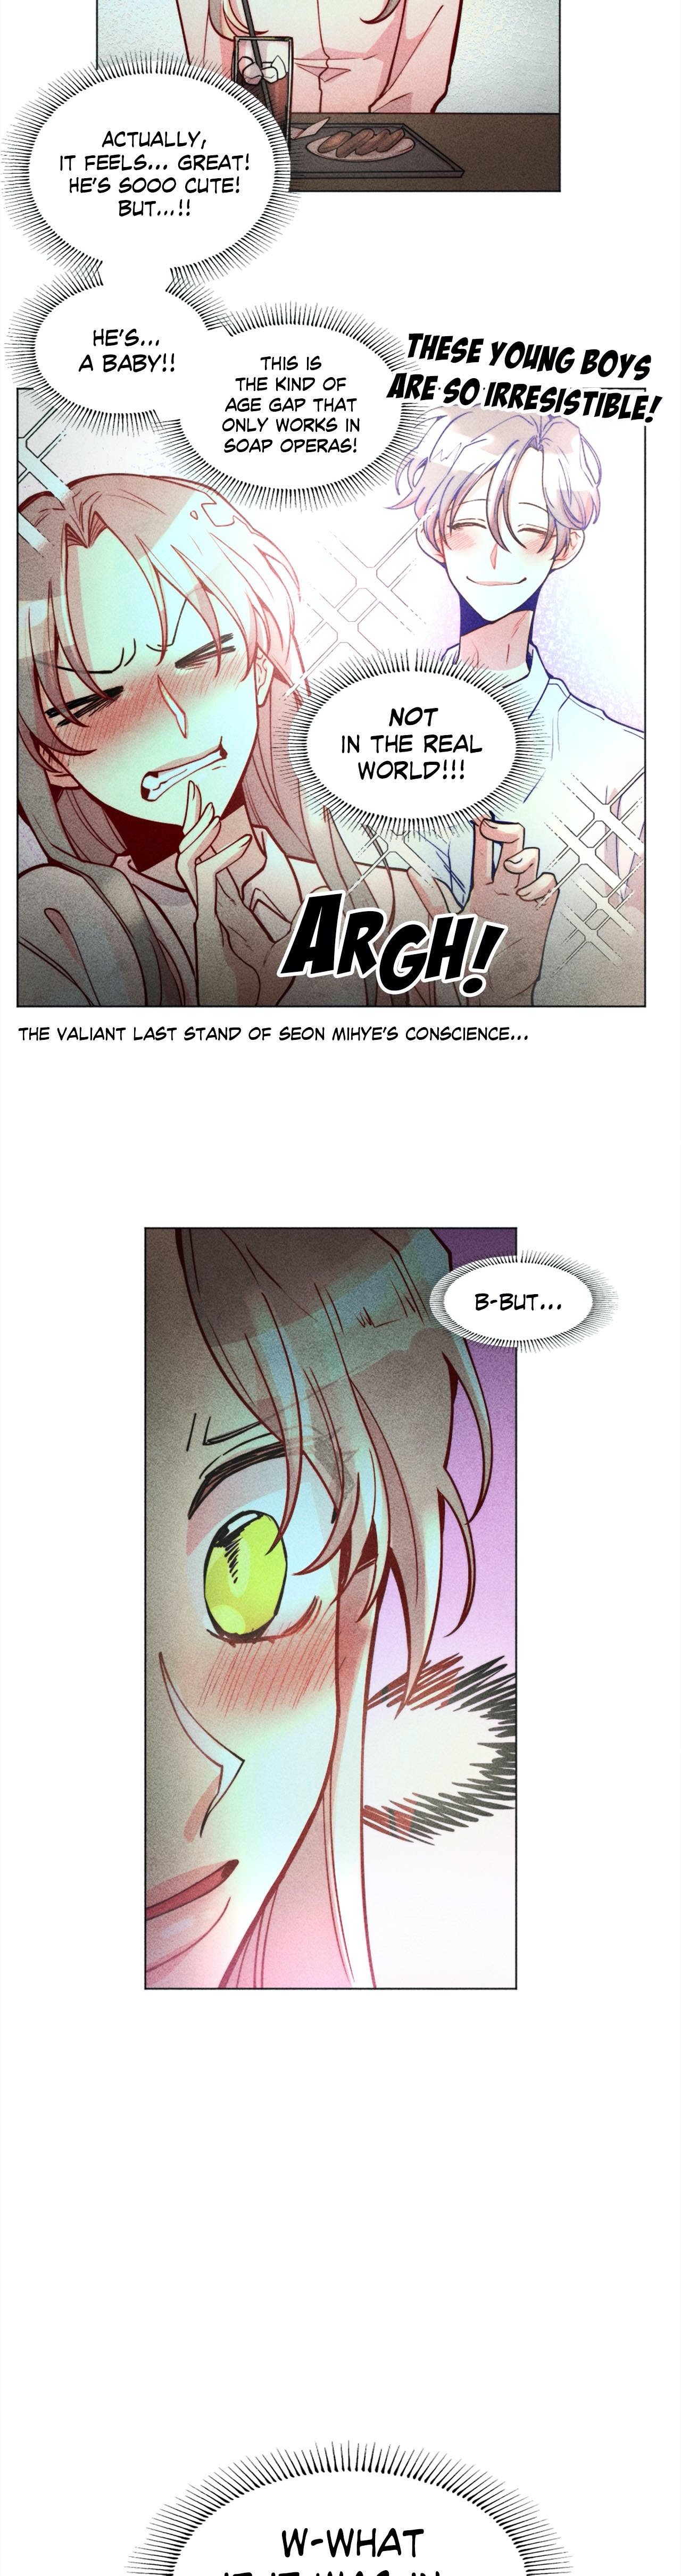 the-virgin-witch-chap-39-3